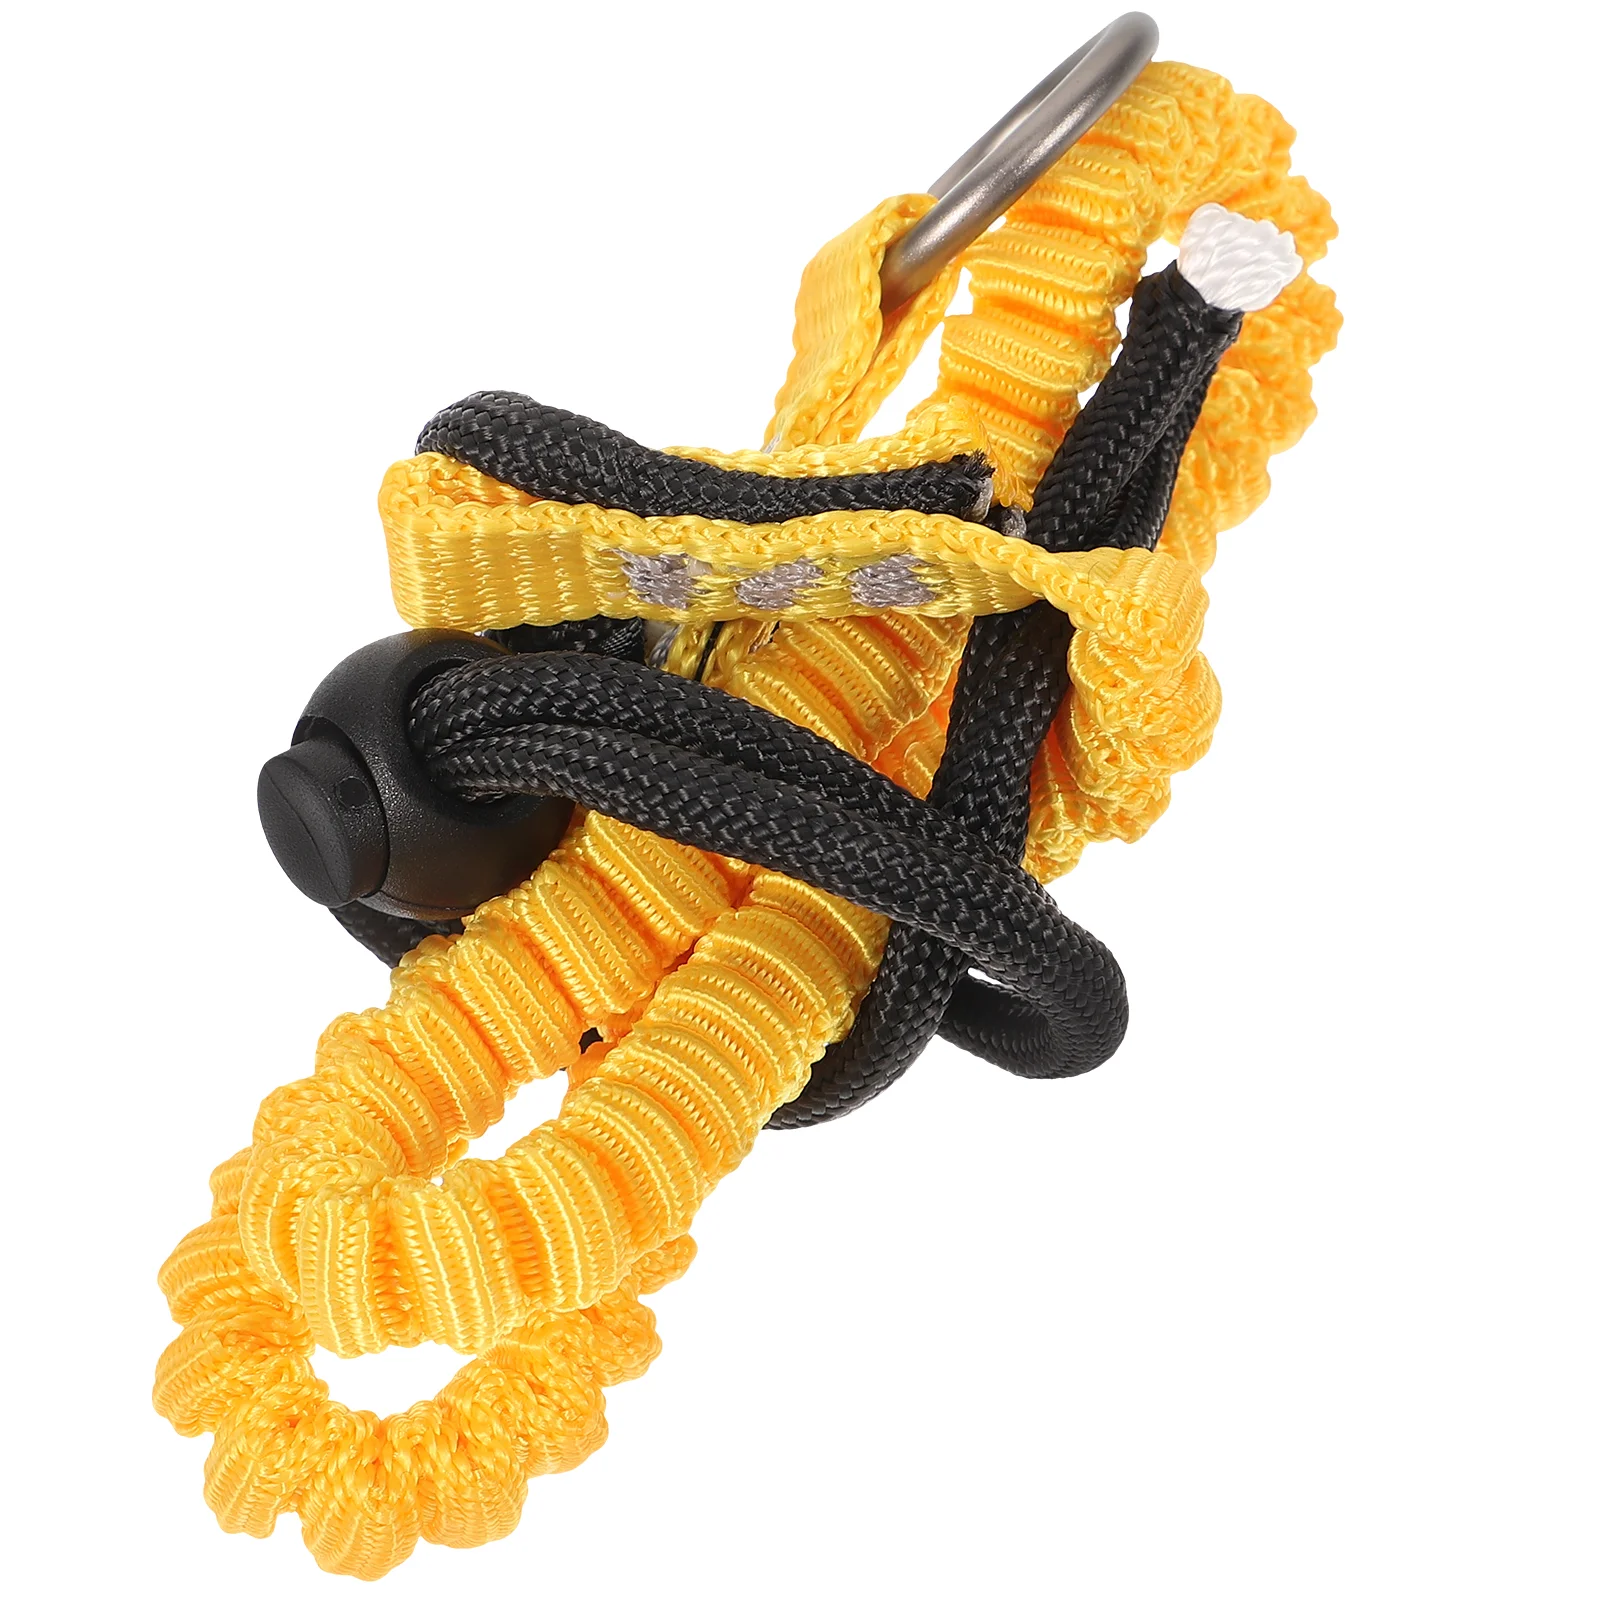 

Tool Elastic Rock Climbing Rope Outdoor Mountaineering Stretch Retractable Heavy Duty